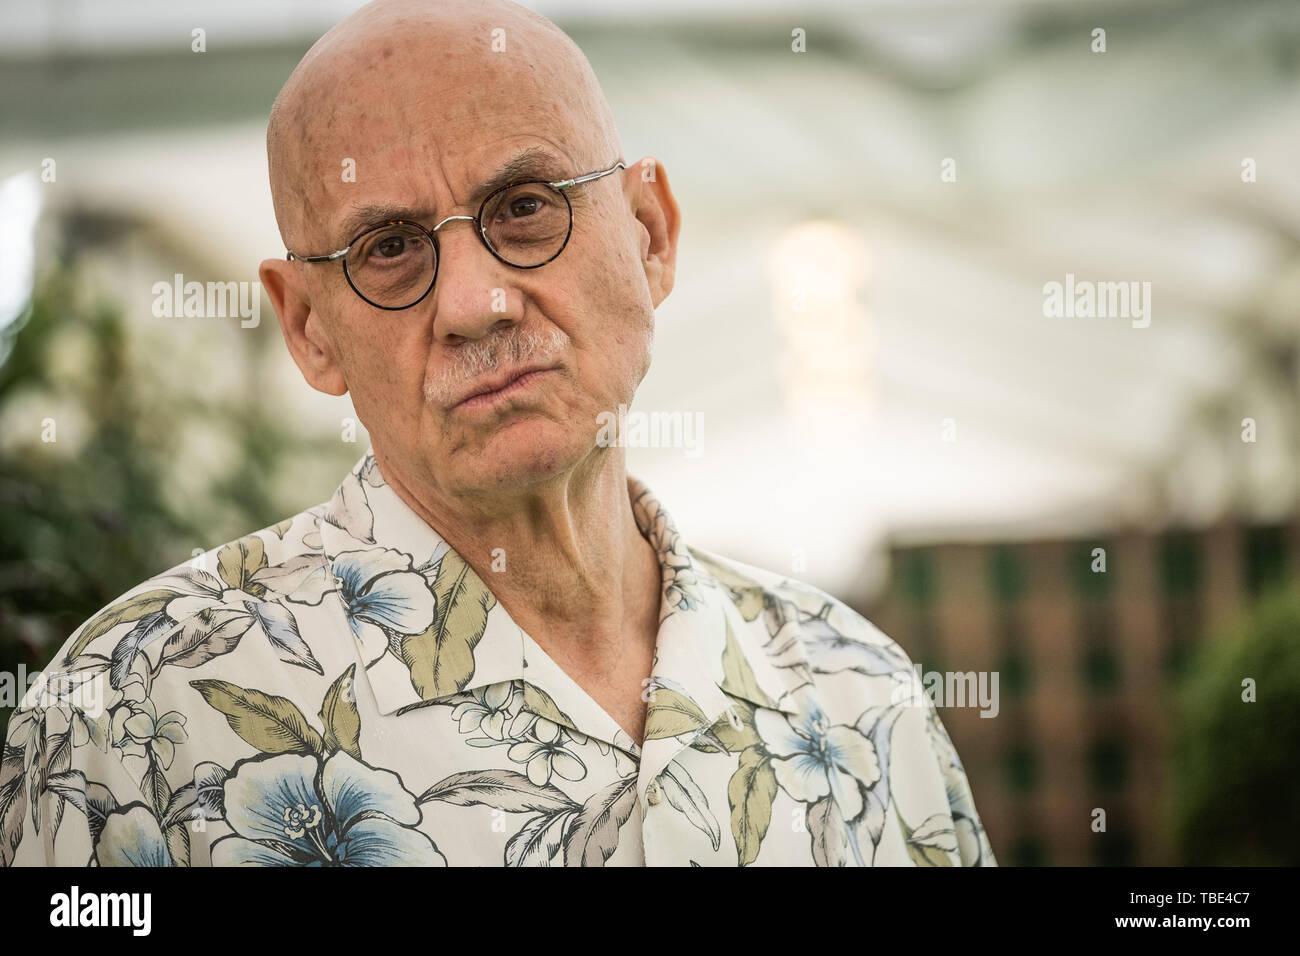 The Hay Festival, Hay on Wye, Wales UK , Saturday 01 June  2019.  Lee Earle 'James' Ellroy , iconic American crime fiction writer and essayist.  Renowned fo his prose stye that  uses only short, staccato sentences.   Appearing at the 2019 Hay Festival.  The festival, now in its 32nd year, held annually in the small town of Hay on Wye on the Wales - England border,  attracts the finest writers, politicians and intellectuals from  across the globe for 10 days of talks and discussions, celebrating the best of the written word and critical debate  Photo © Keith Morris / Alamy Live News Stock Photo